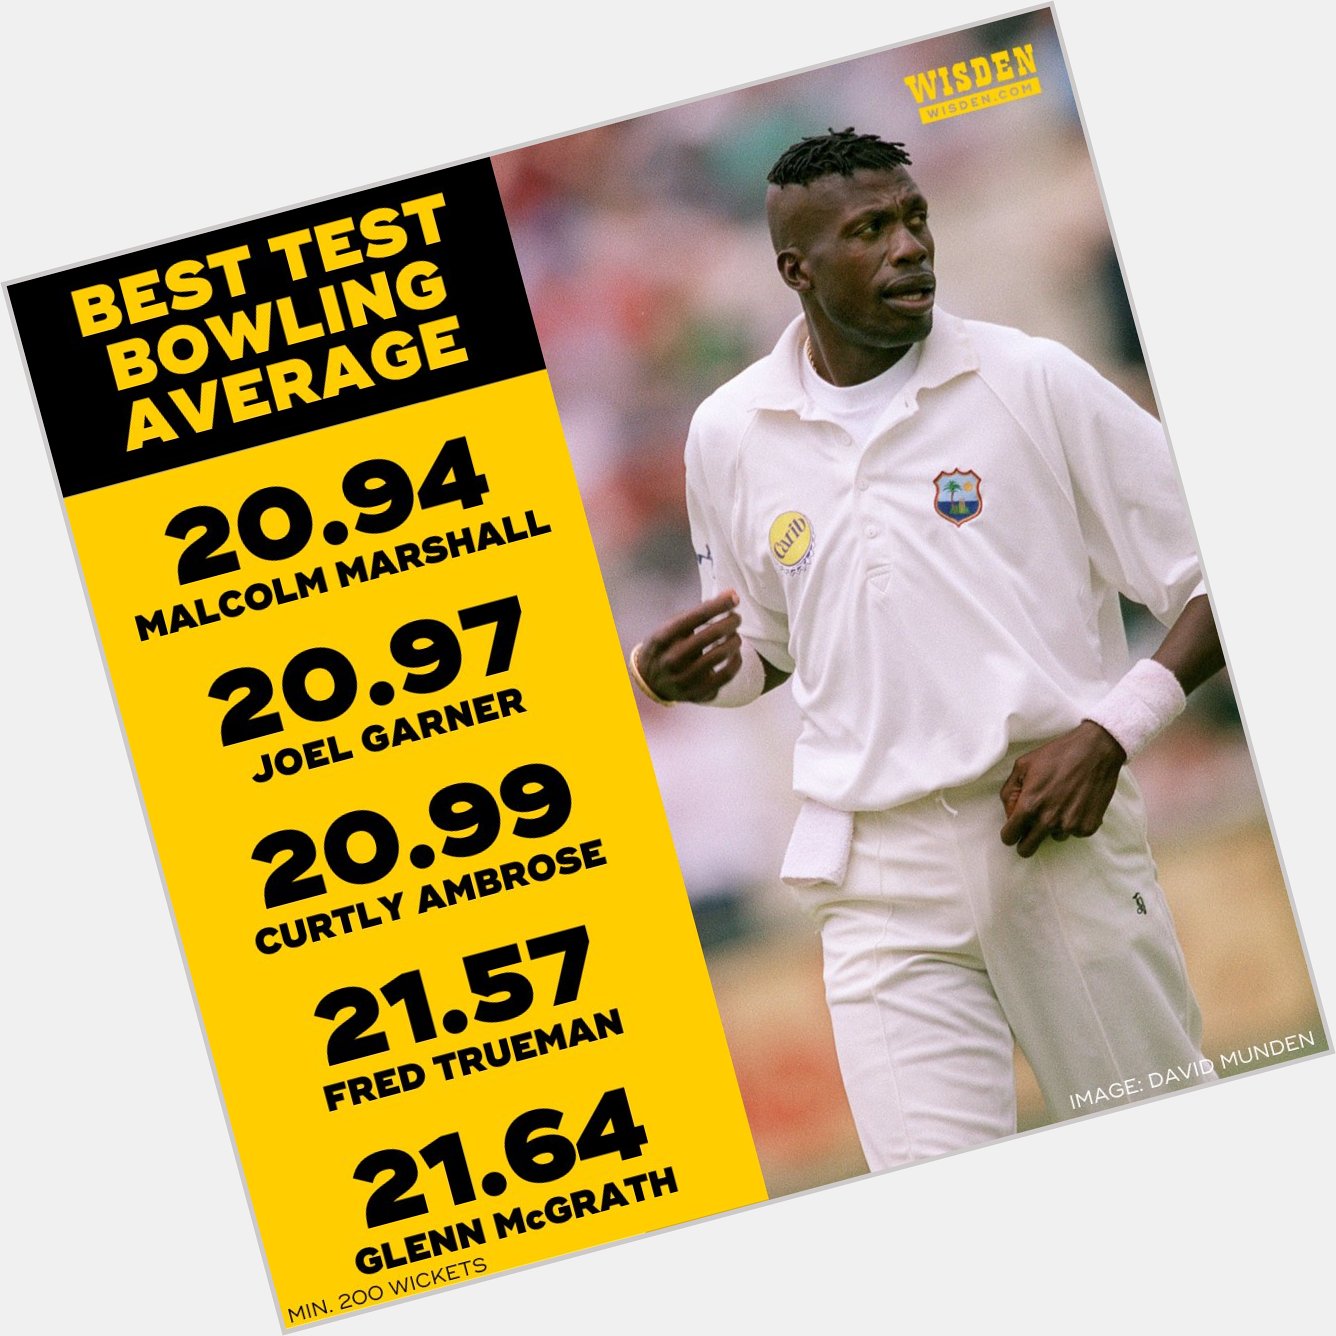 Happy birthday to Curtly Ambrose, one of the finest fast bowlers cricket has ever known 